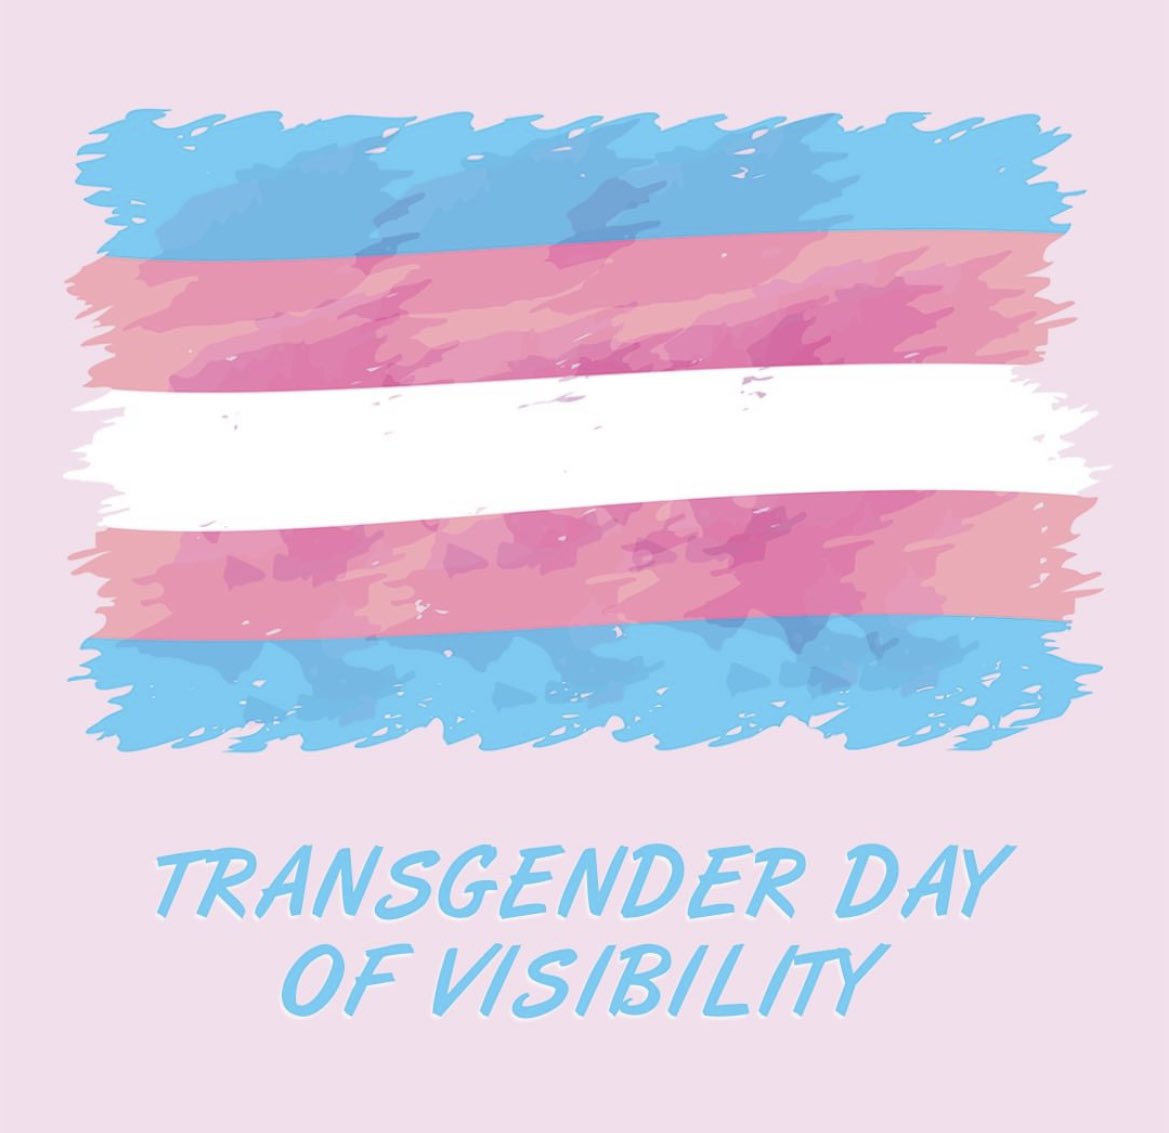 March 31st is Transgender Day of Visibility. We celebrate and uplift the voices and experiences of transgender people. Today and every day, we honour the courage and resilience of those who are living their truth despite the challenges they may face. @NVSD44 @cg_pac